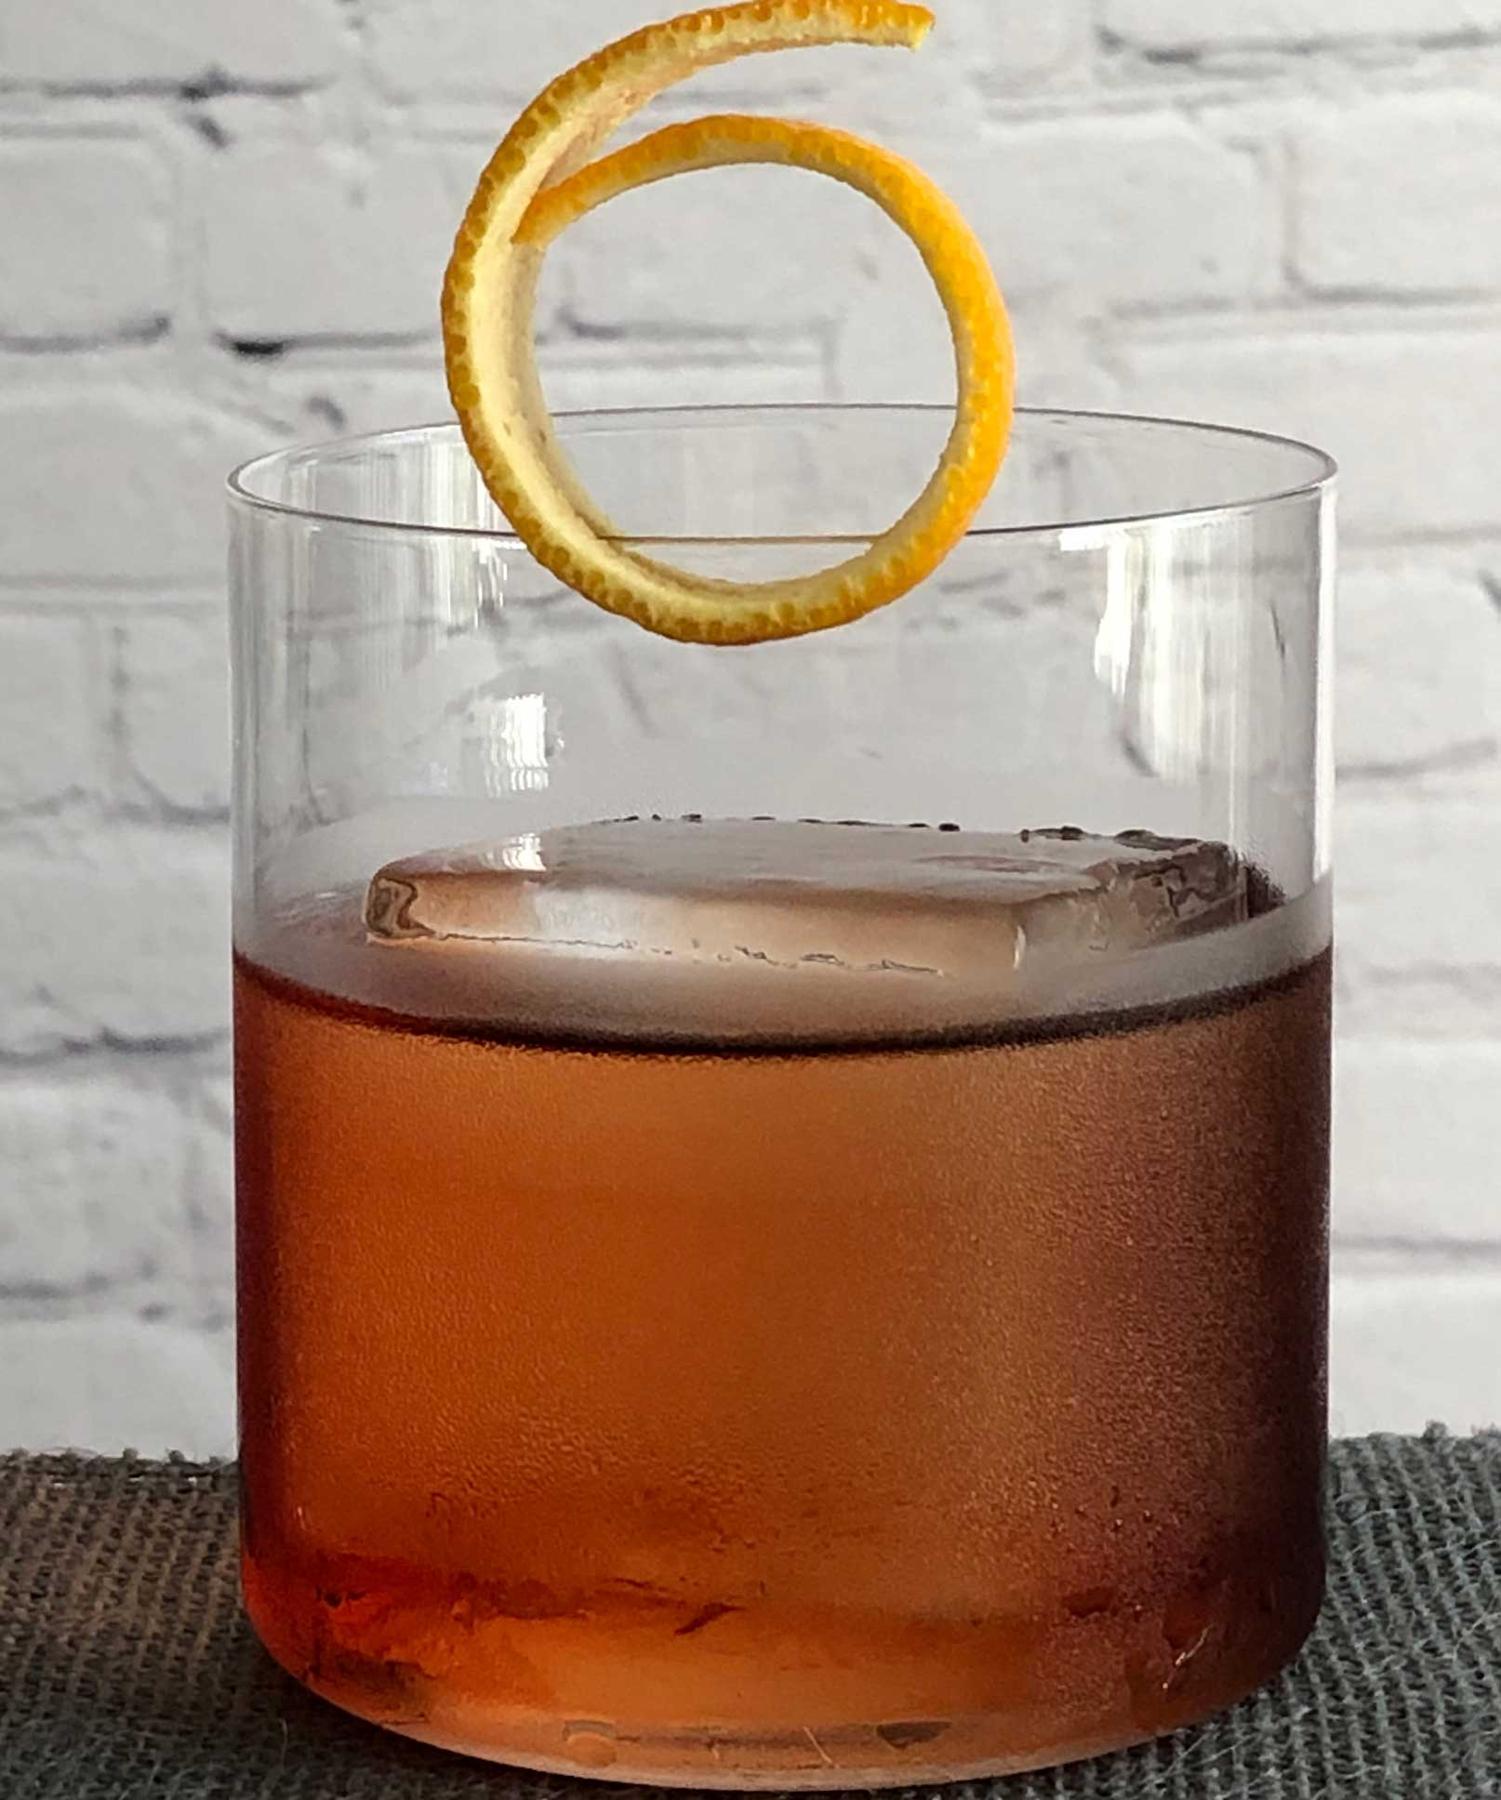 An example of the Crosstown Traffic, the mixed drink (drink) featuring Hayman’s London Dry Gin, Cardamaro Vino Amaro, Cocchi Americano Rosa, and orange twist; photo by Lee Edwards